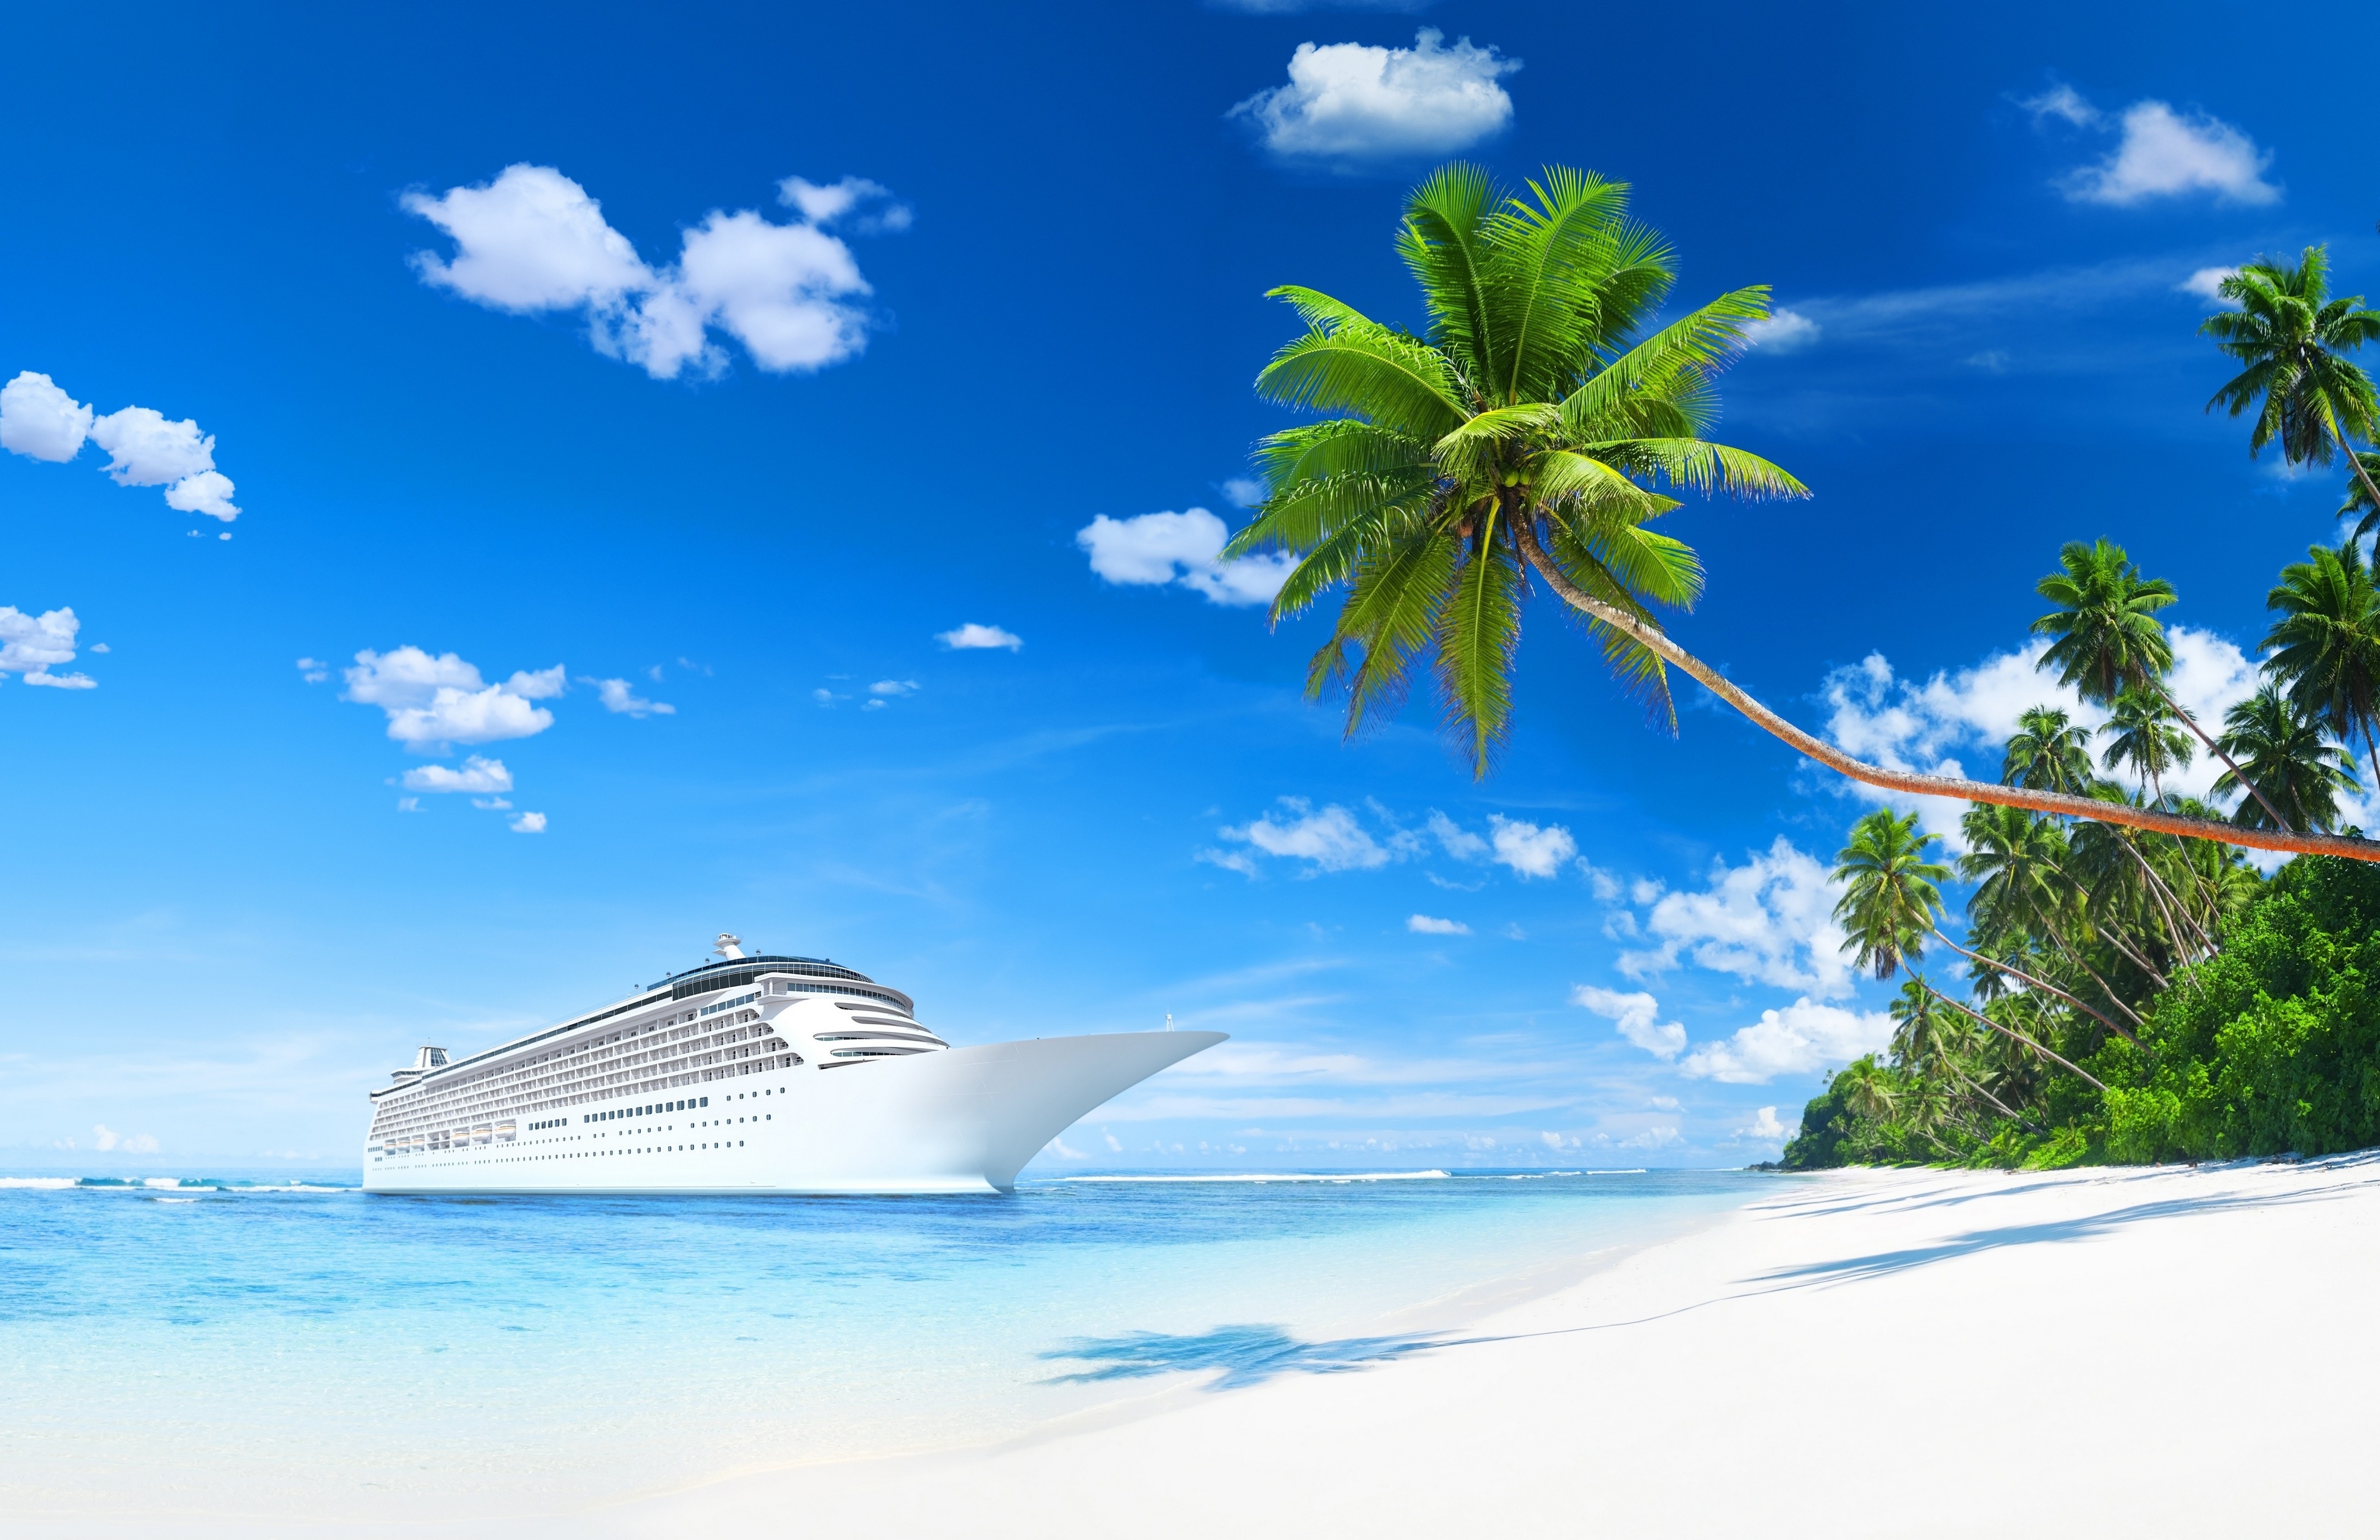 Cruise Ship Wallpapers Pictures Images